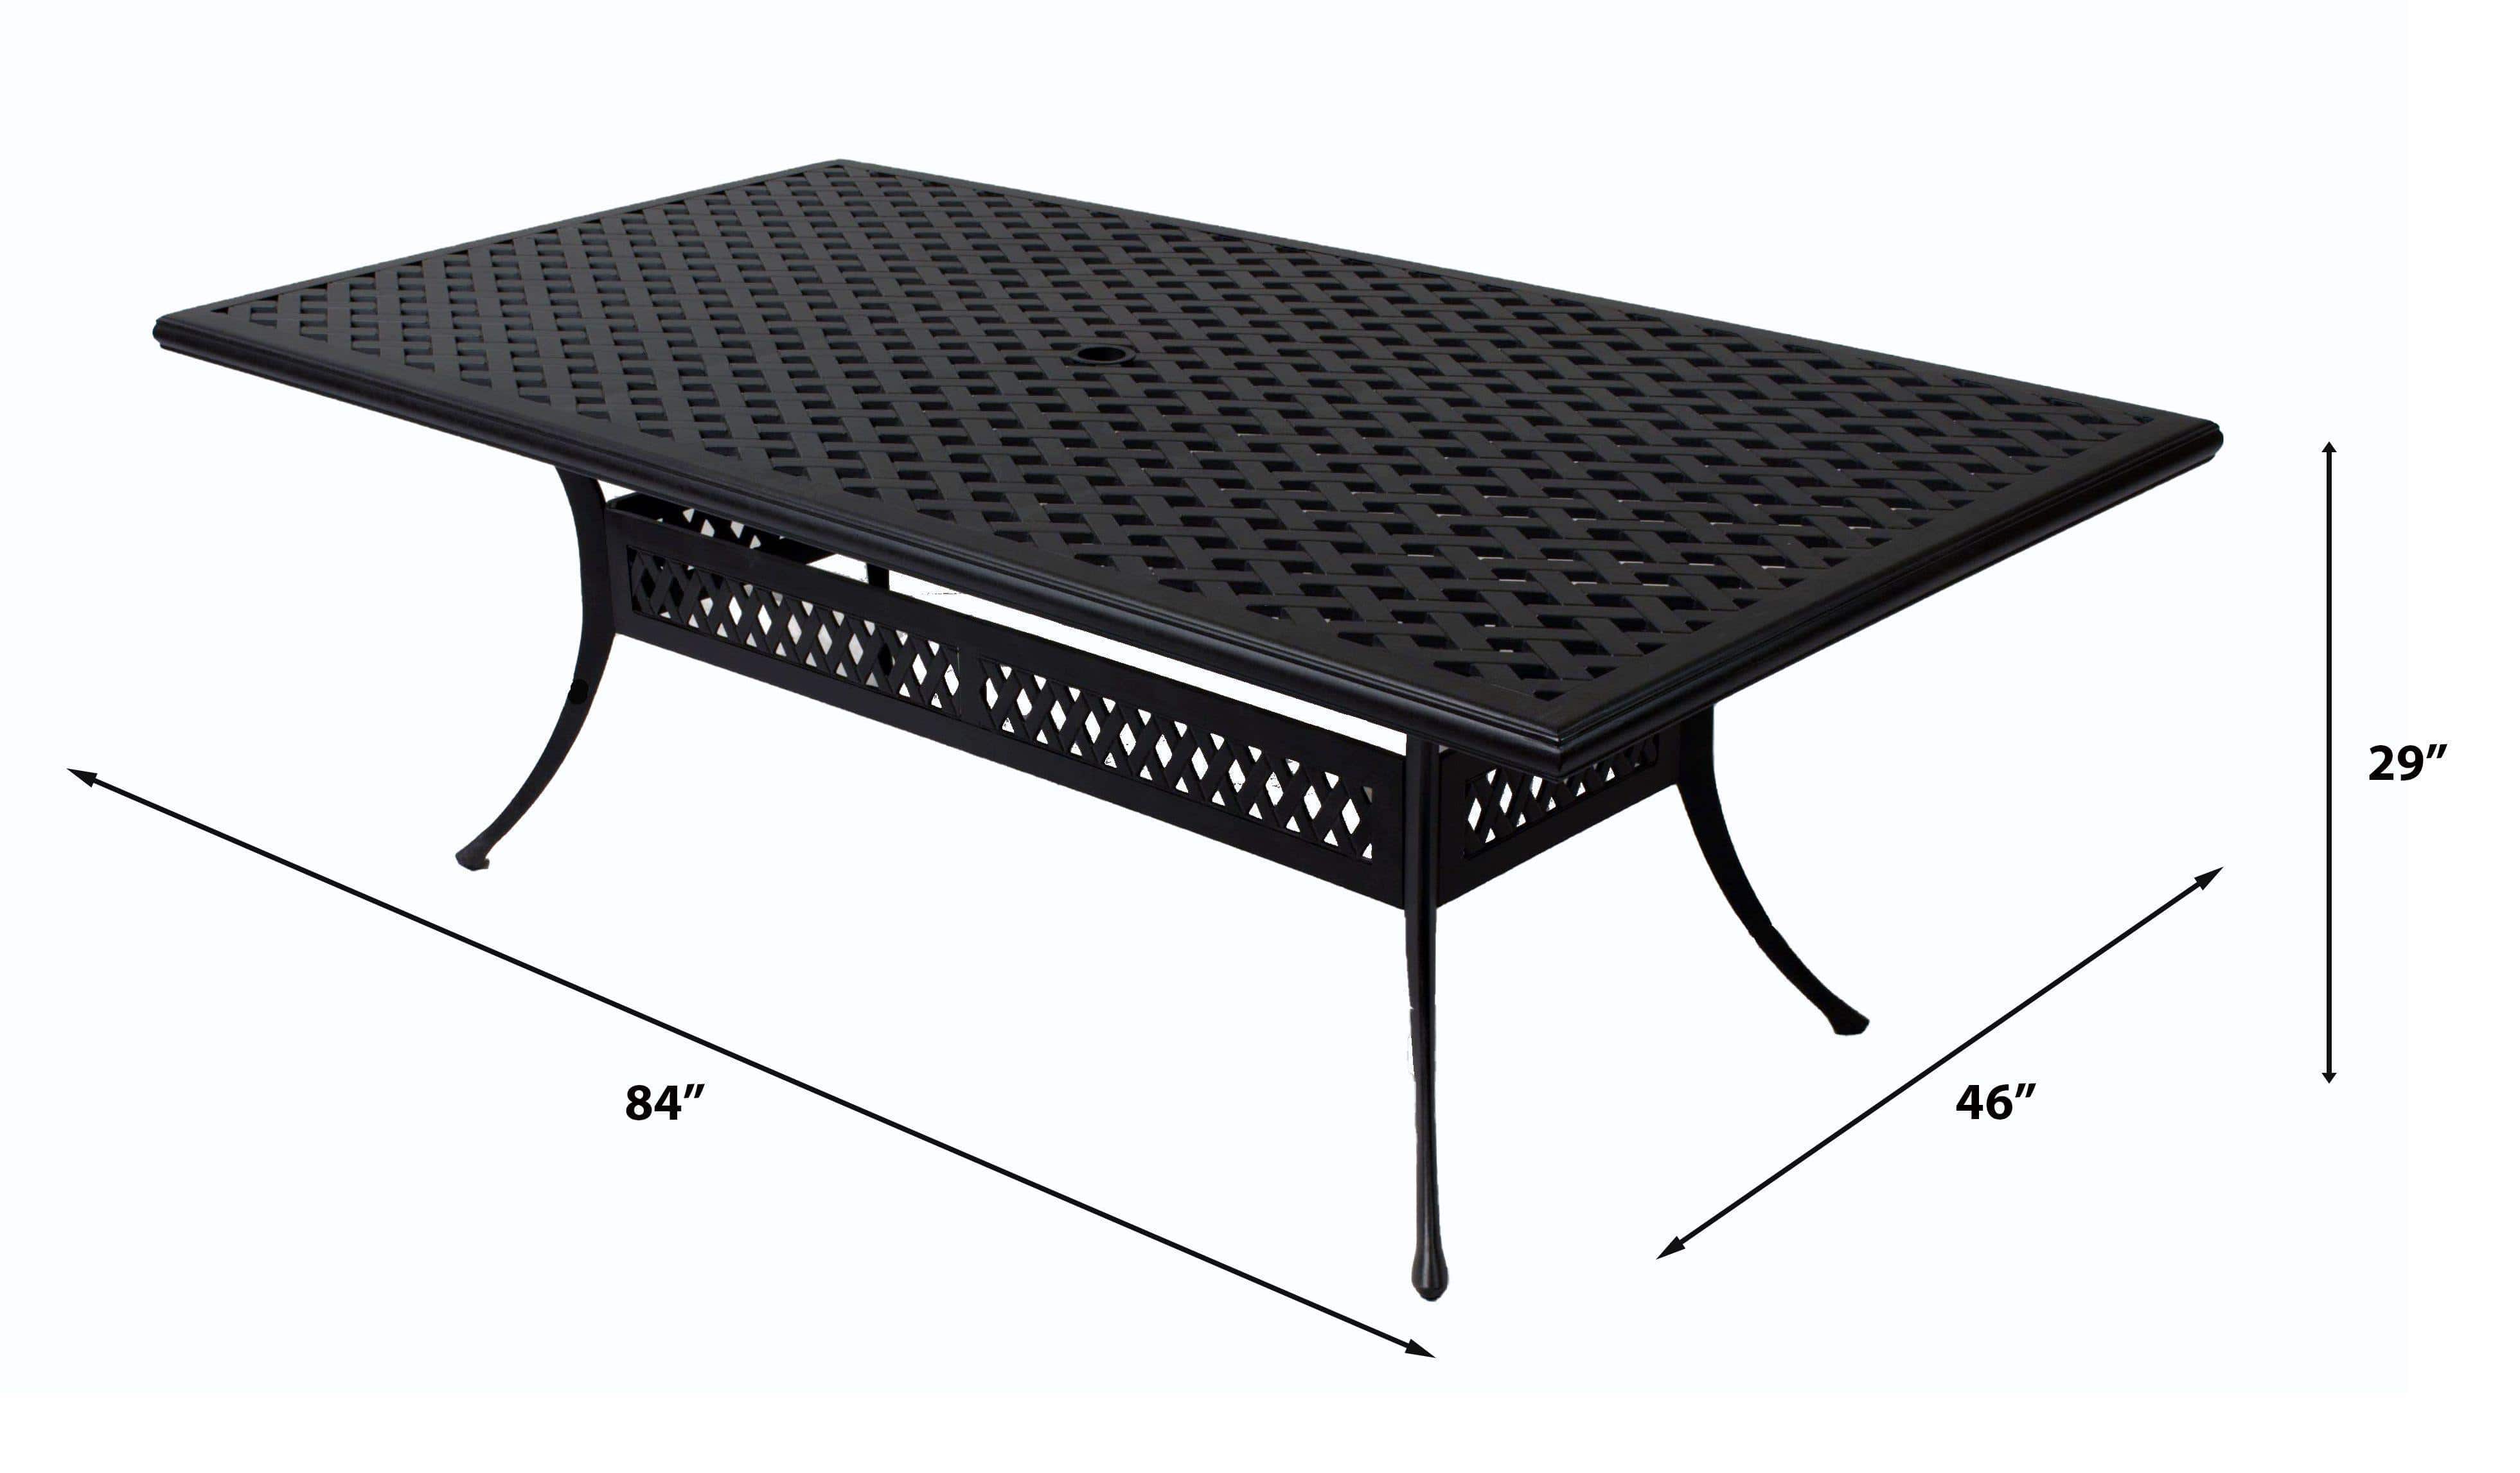 Lawton Casual Comfort Outdoor Dining Table Lawton Casual Comfort - 86" X 46" Rectangle Dining Table Weave